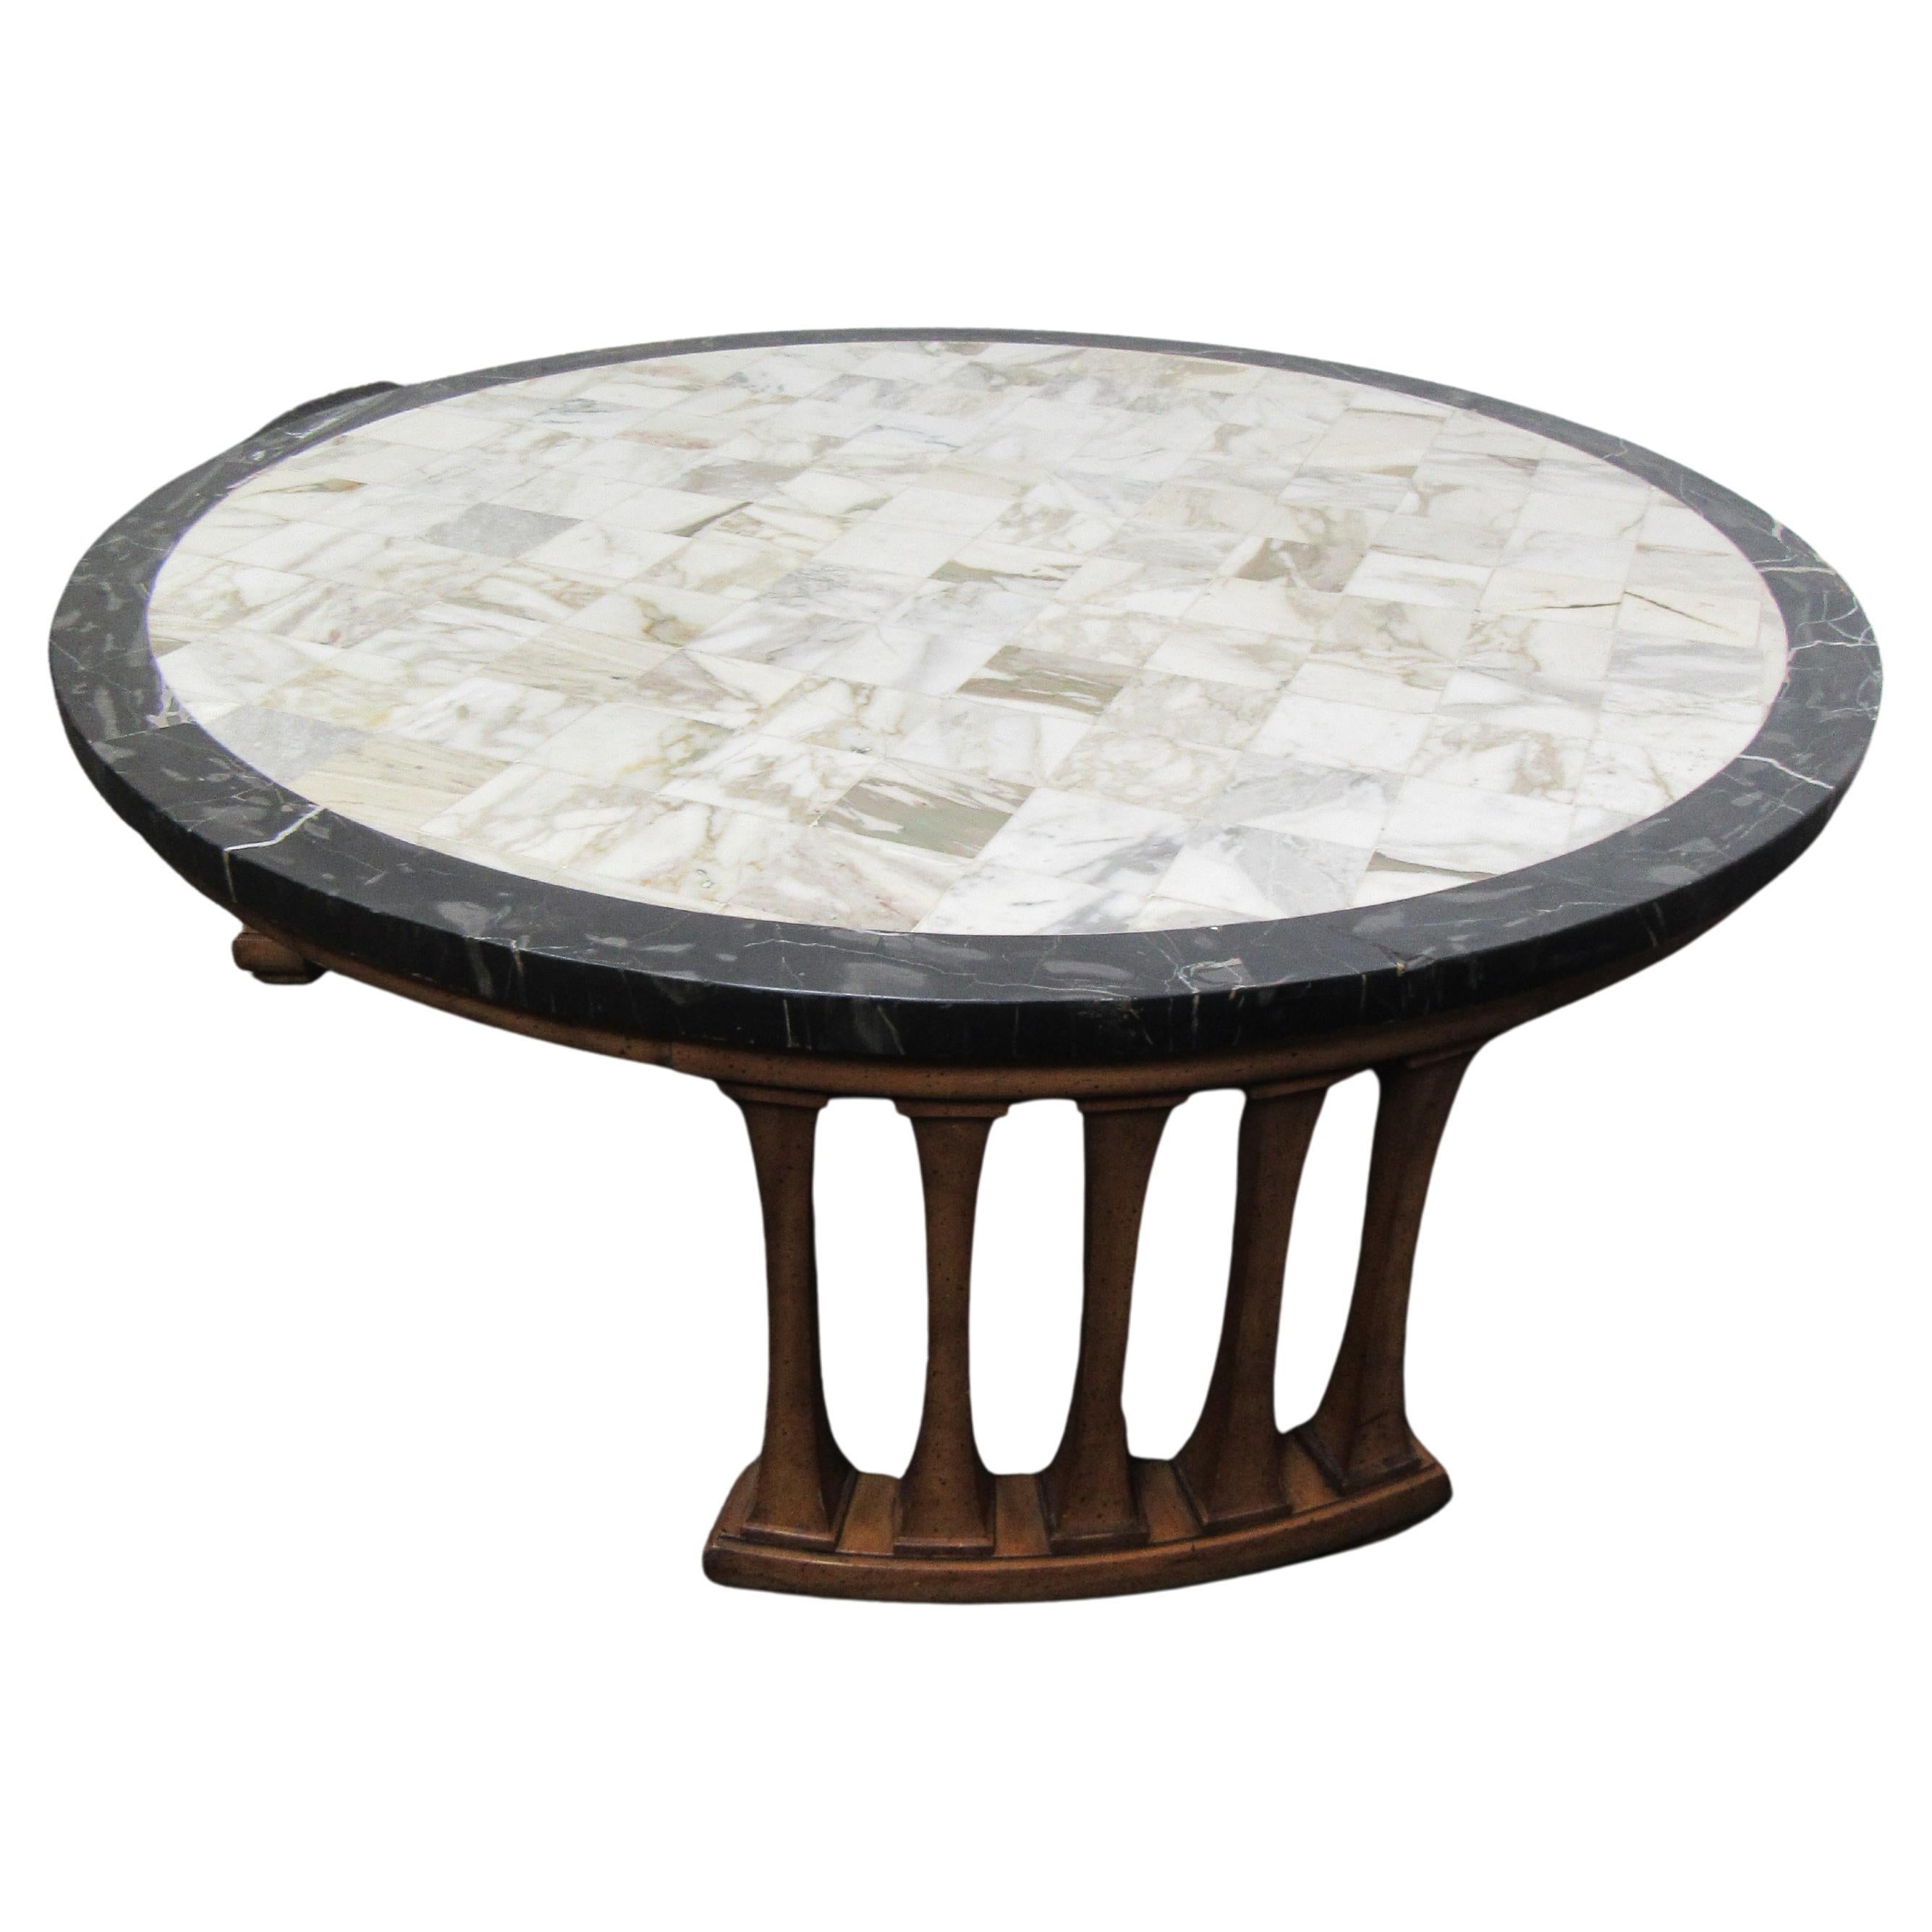 Interesting marble coffee table. Wooden legs with a travertine top.
(Please confirm item location - NY or NJ - with dealer).
   